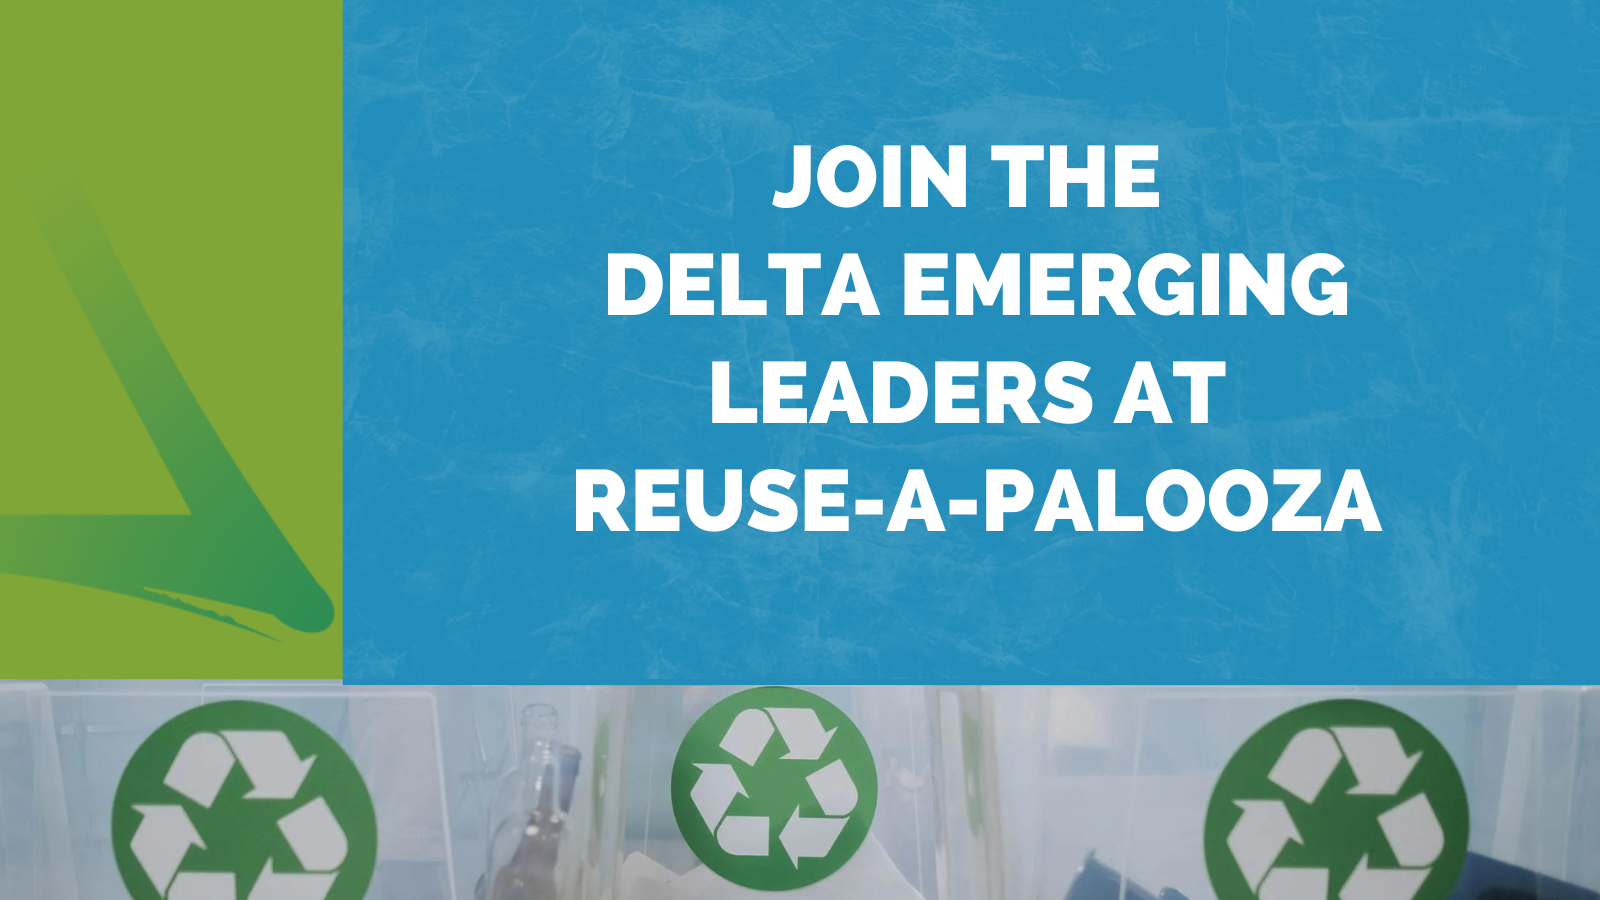 Join the Delta Emerging Leaders at Reuse-A-Palooza